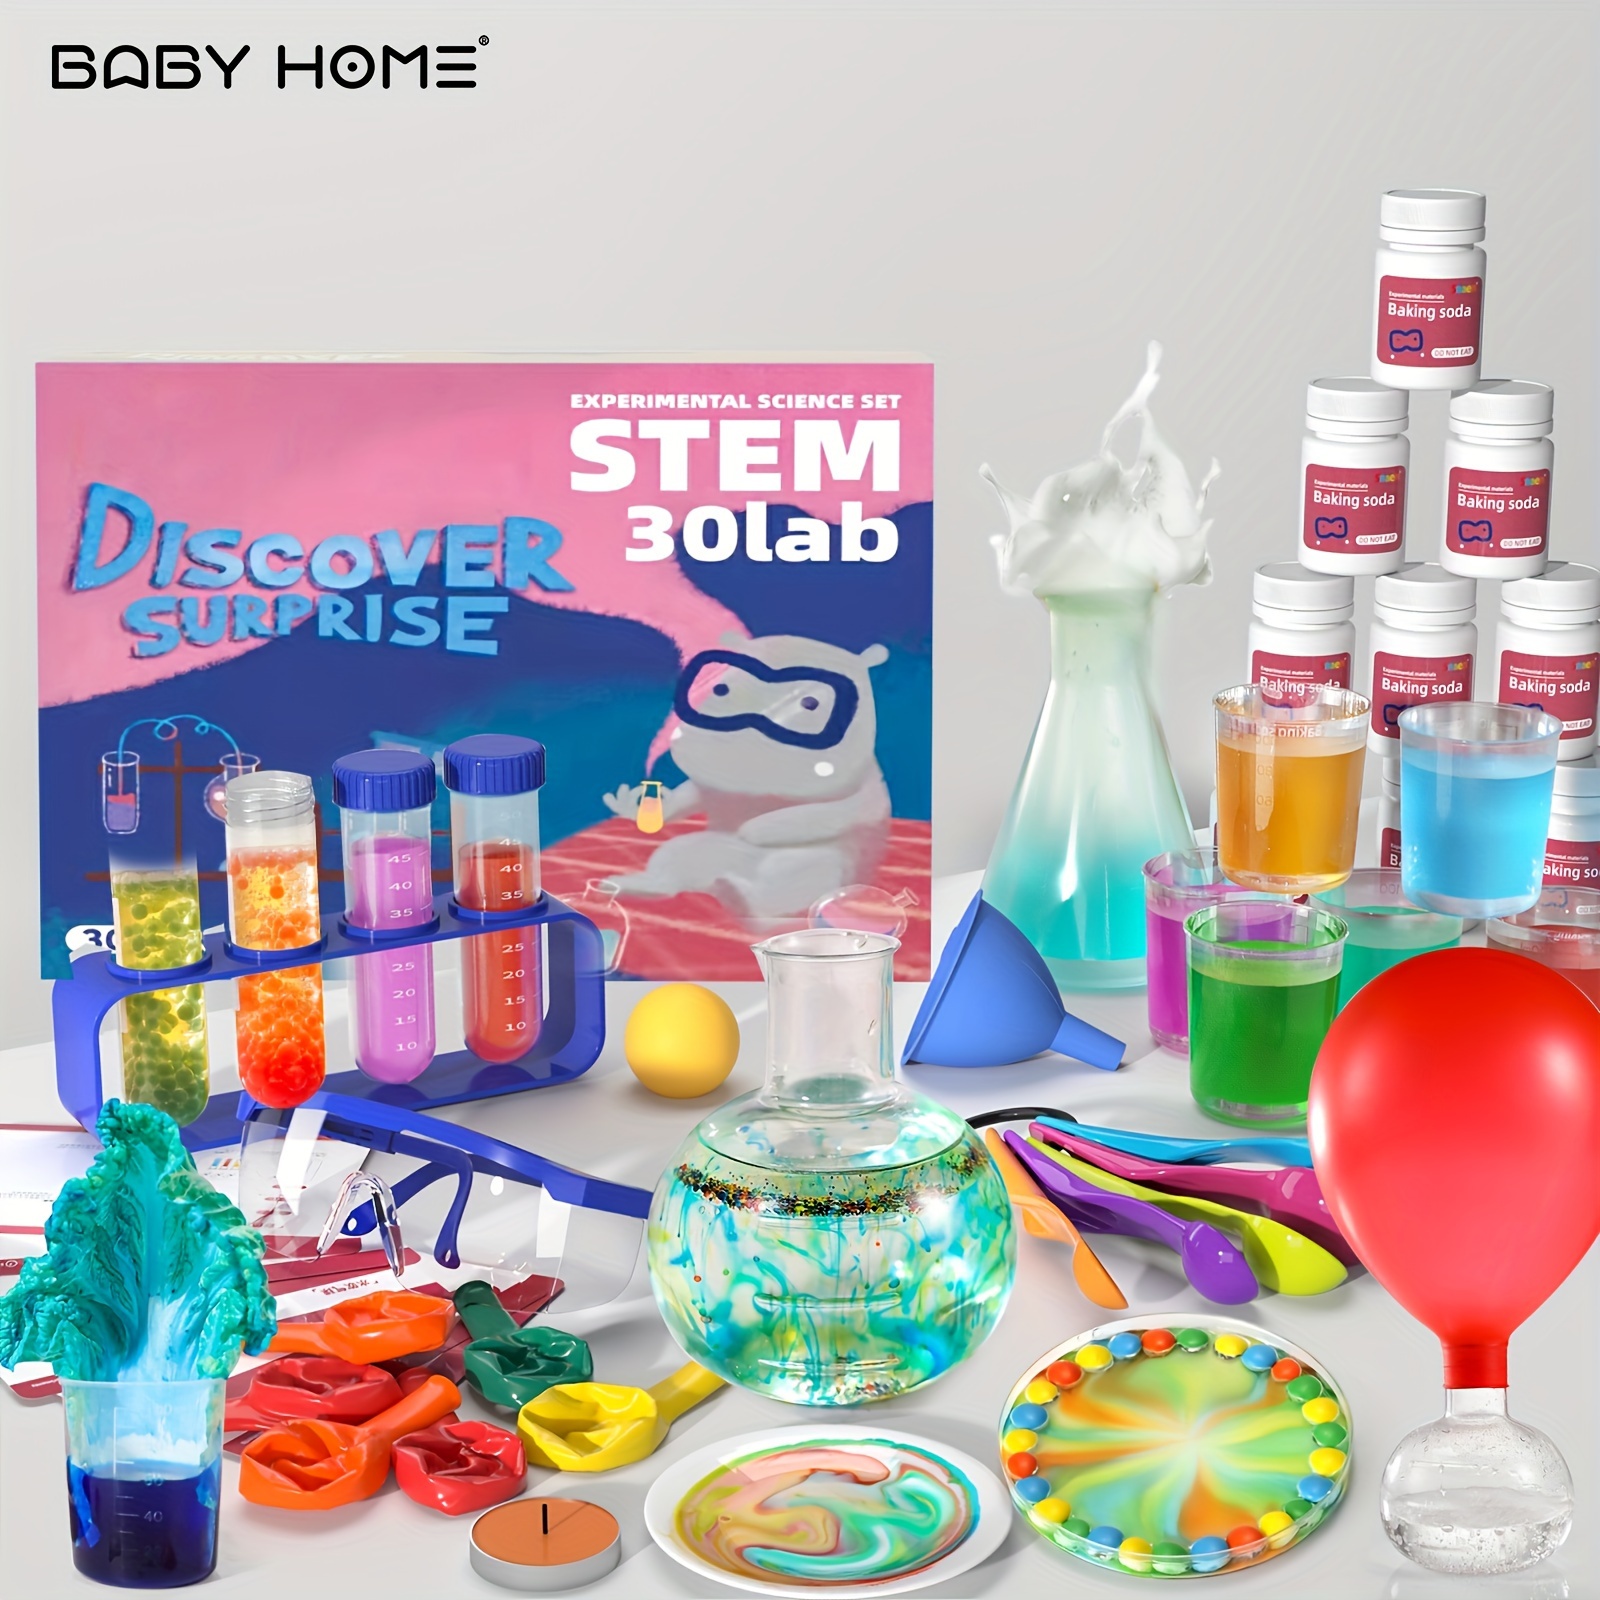 

Babyhome Science Kit With 30 Science Lab Experiments, Diy Stem Educational Learning Scientific Tools For Boys And Girls Kids Toys Gift